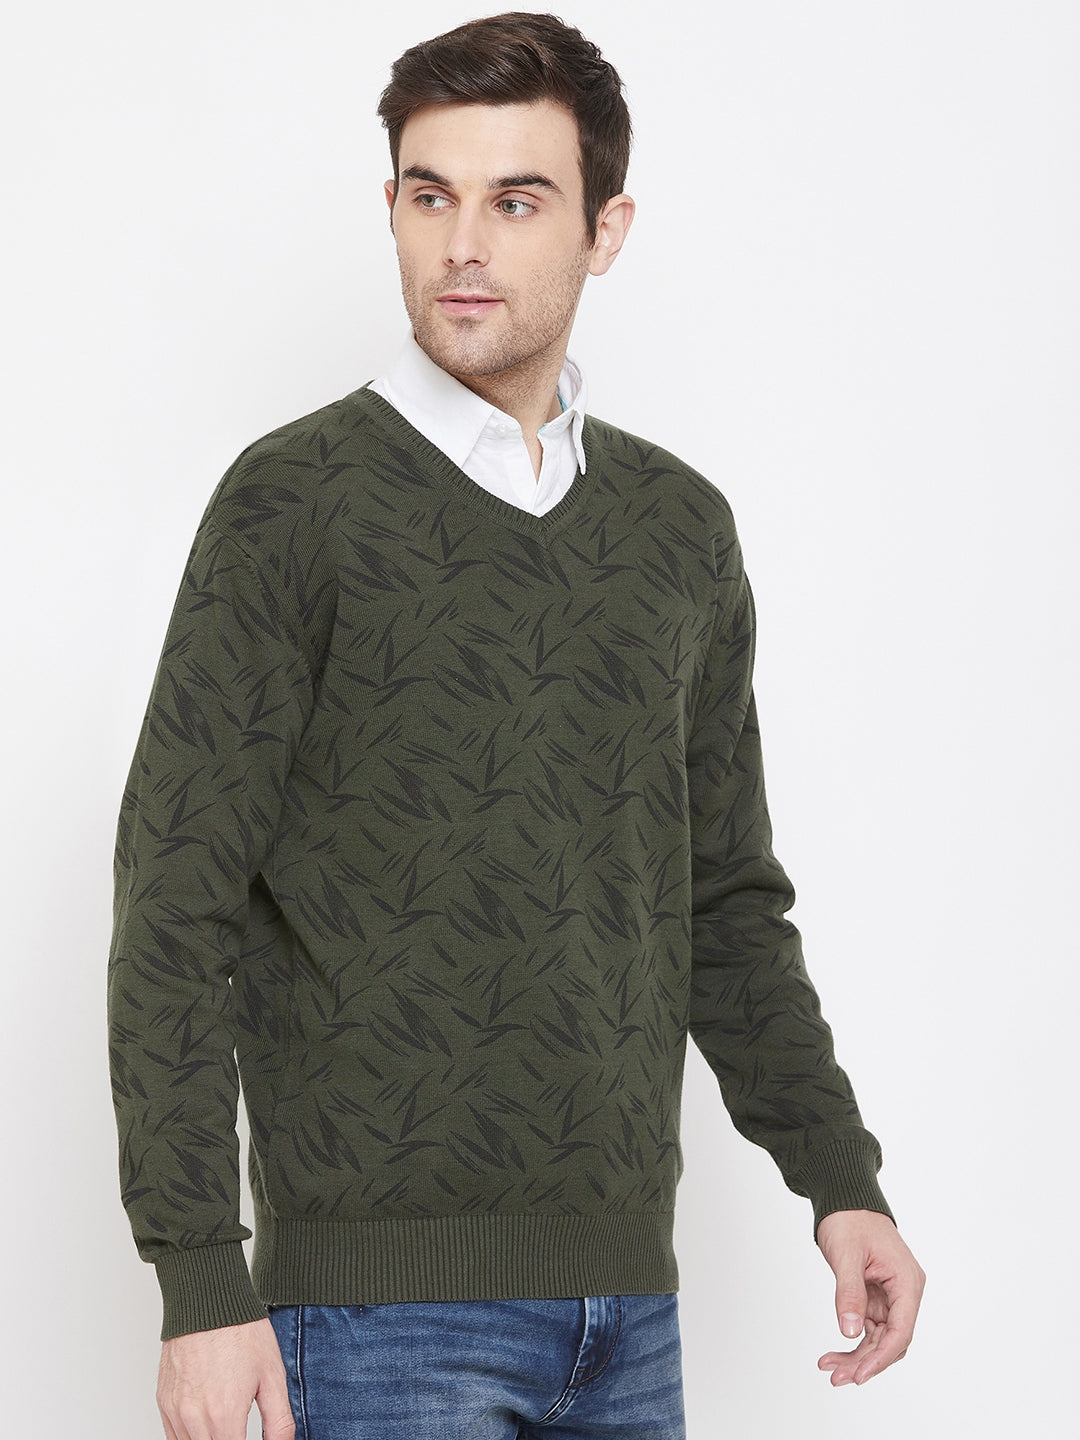 Olive Printed V-Neck Sweater - Men Sweaters